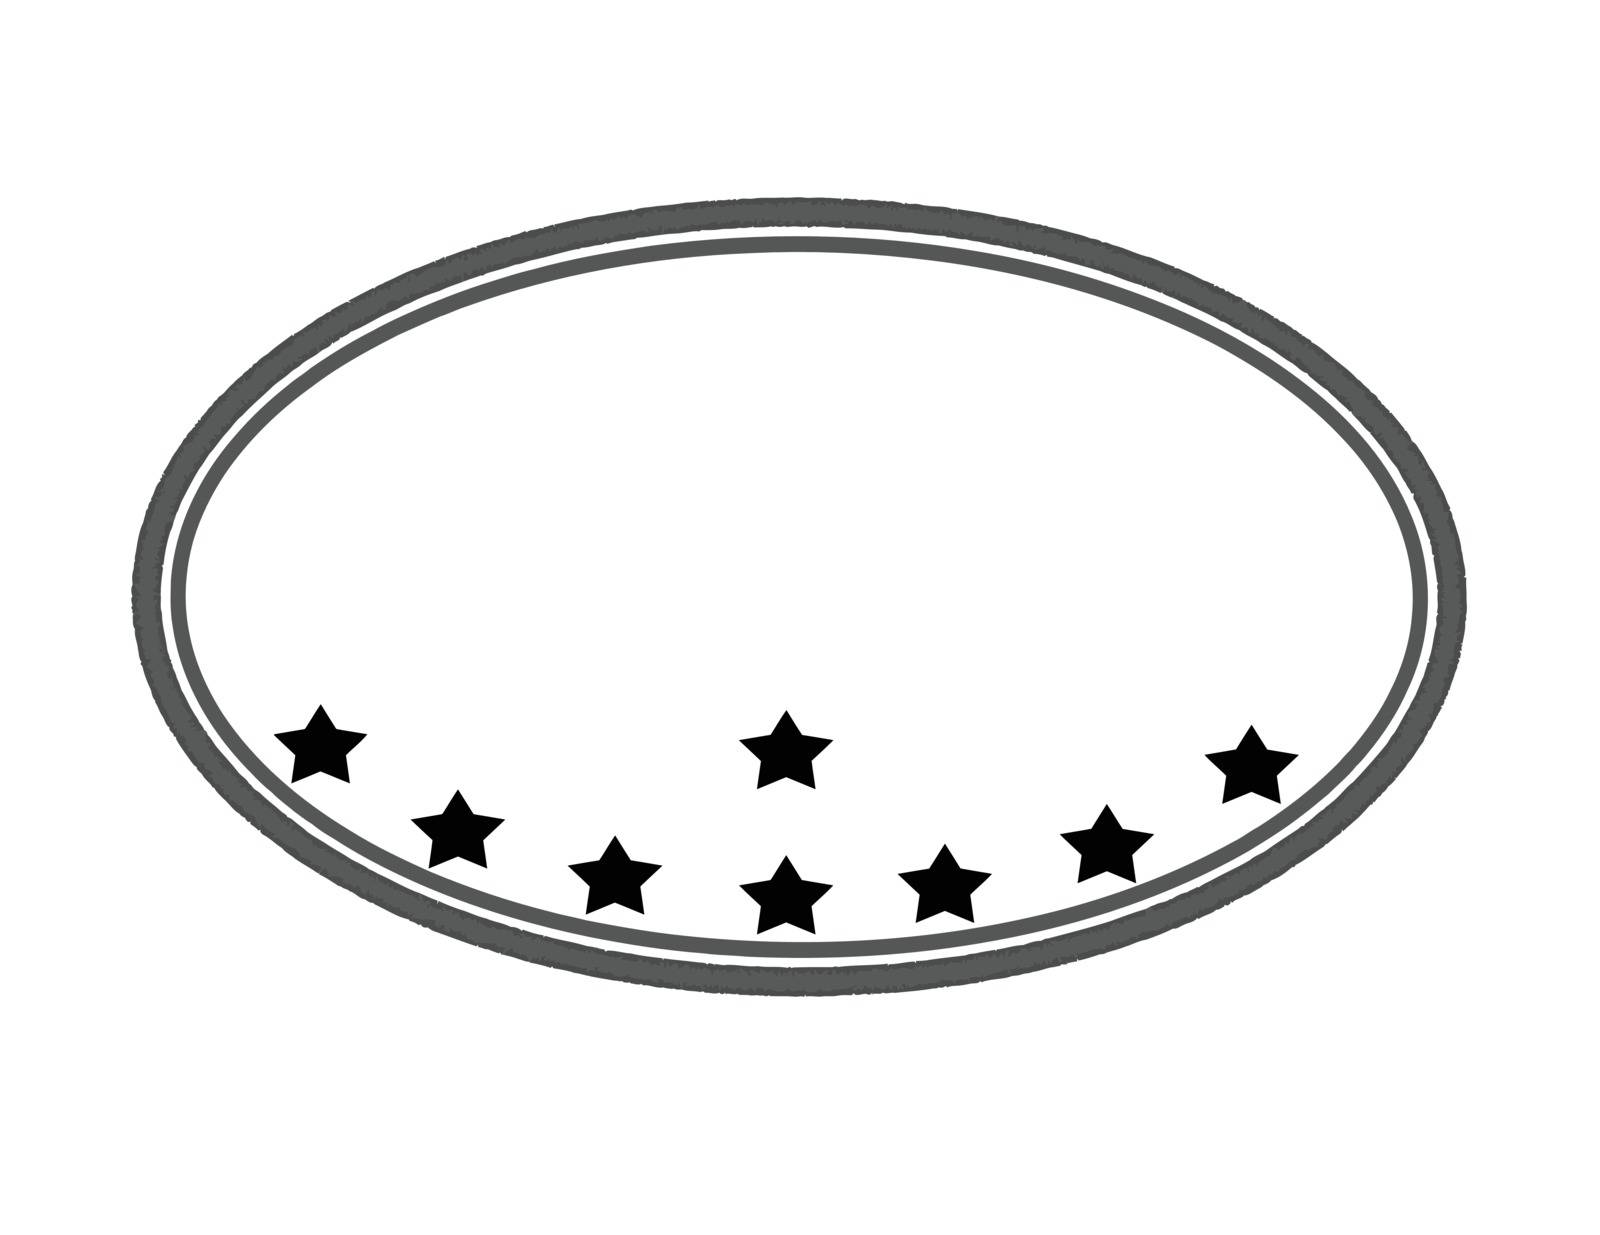 Oval stamp with stars